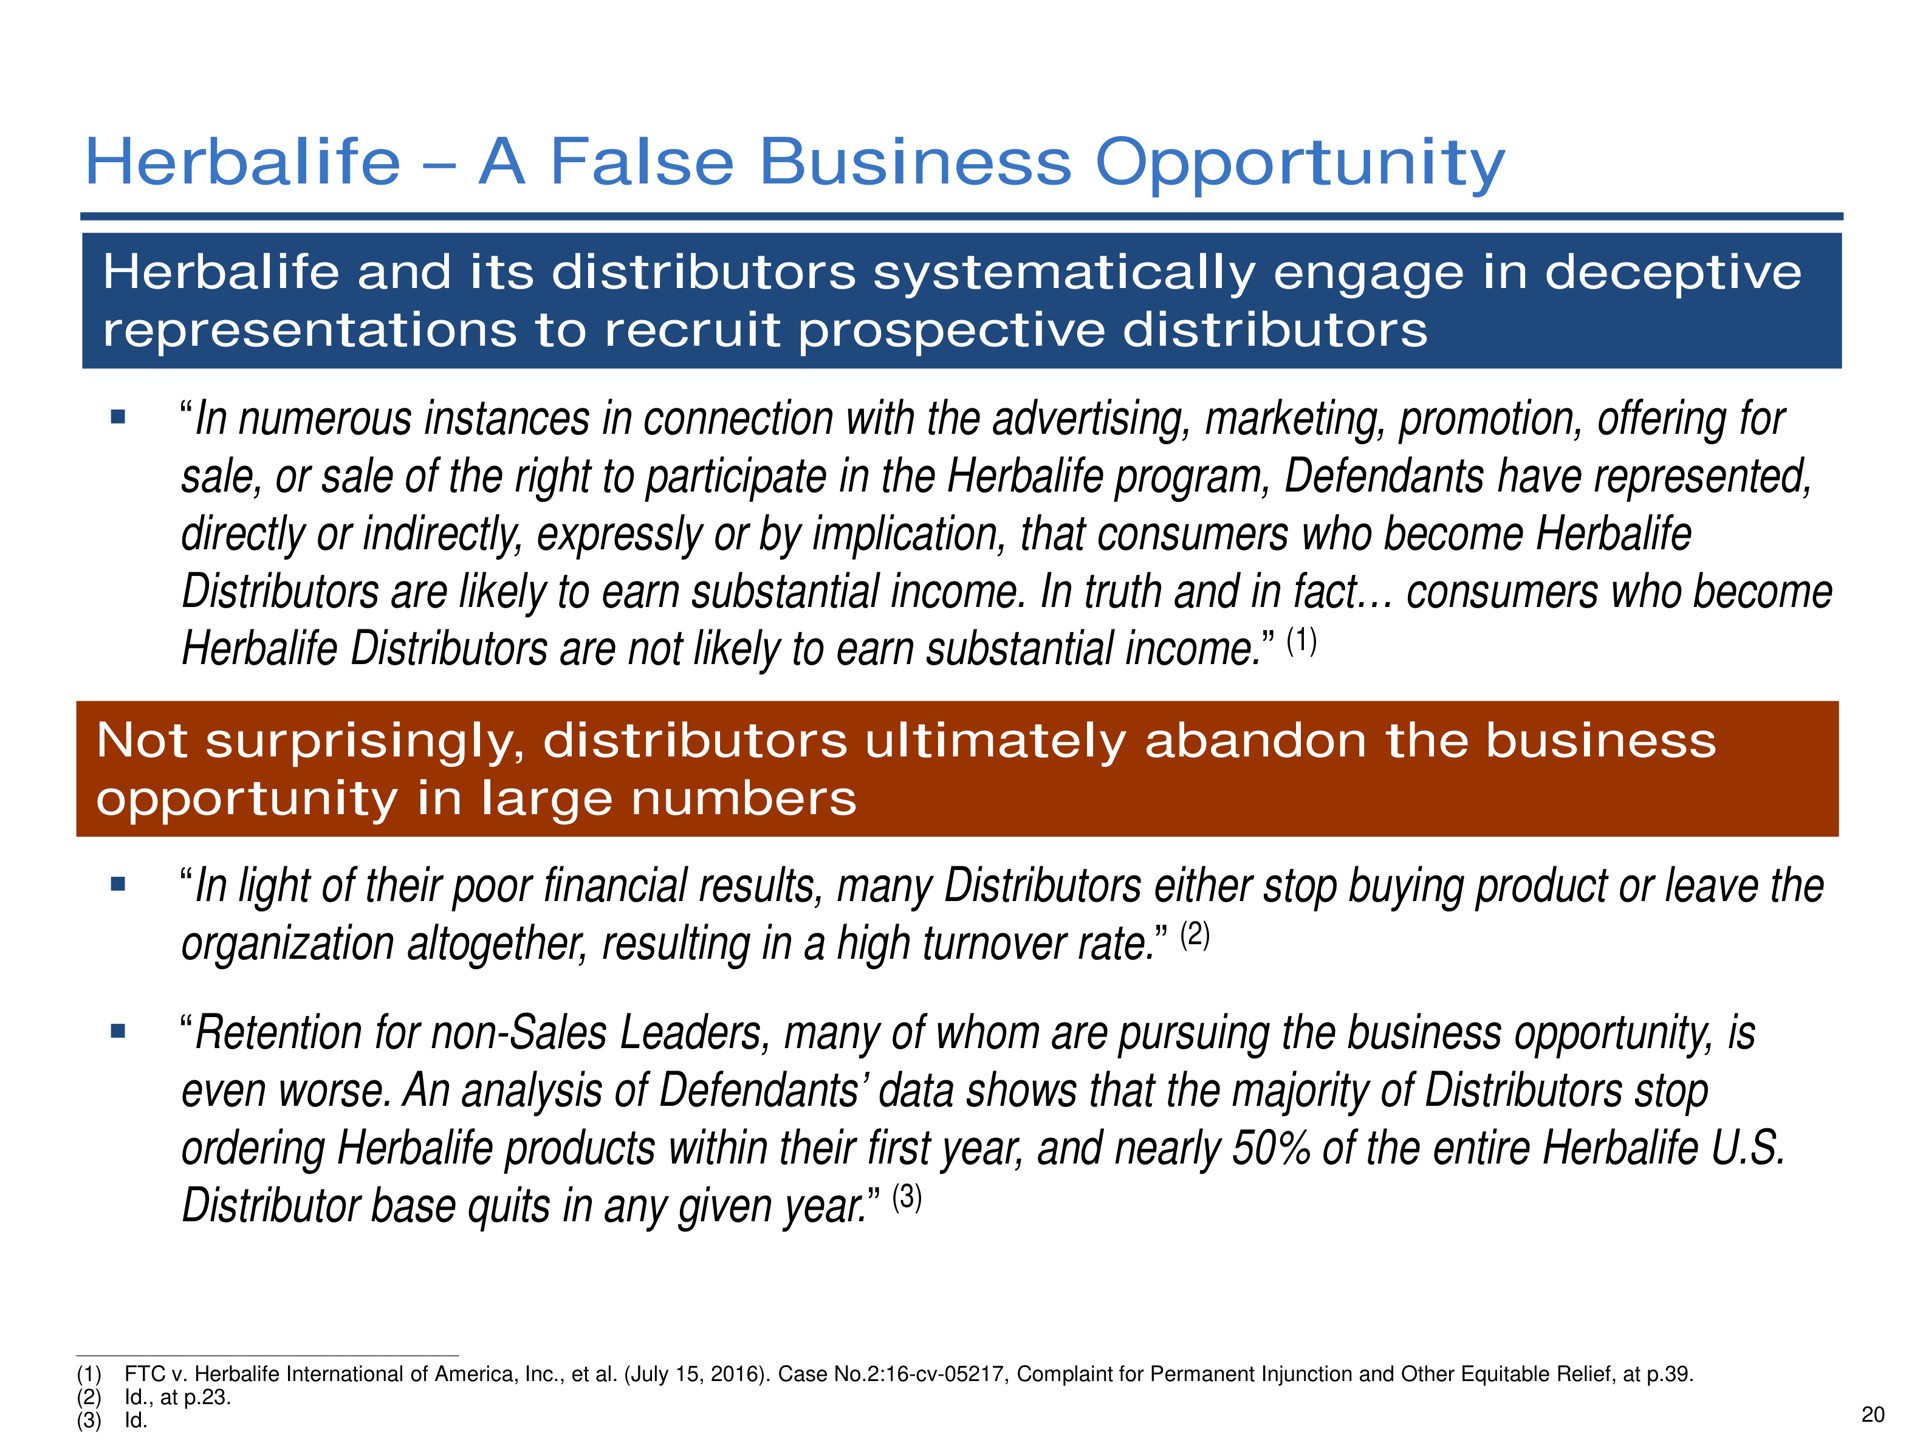 a false business opportunity | Pershing Square